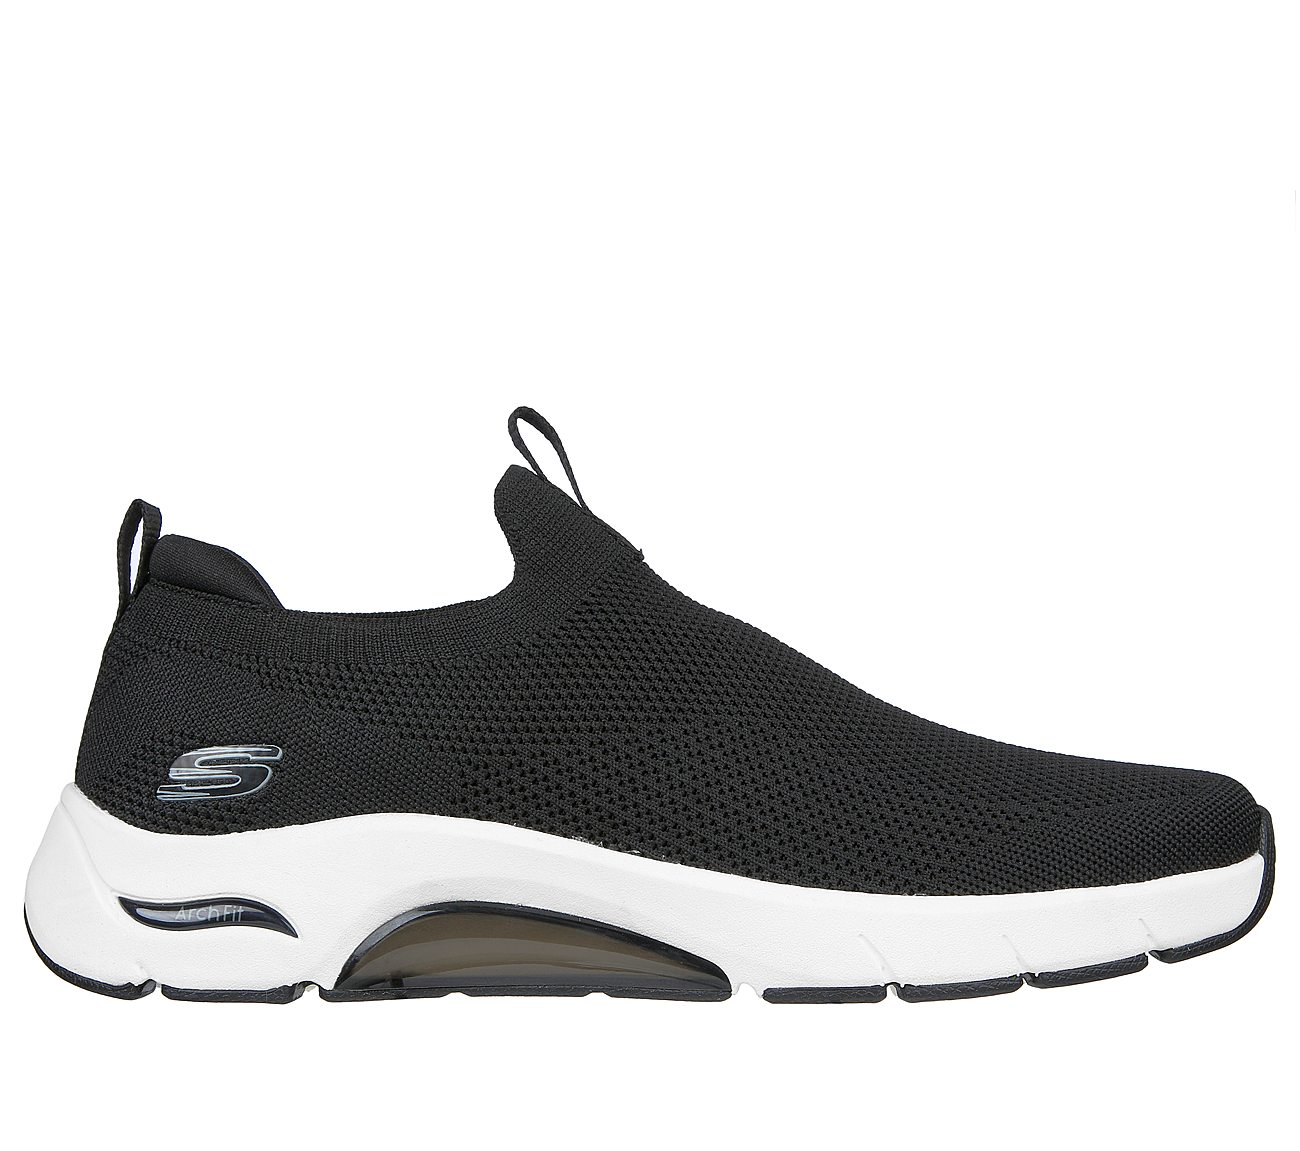 SKECH-AIR ARCH FIT, BLACK/WHITE Footwear Lateral View